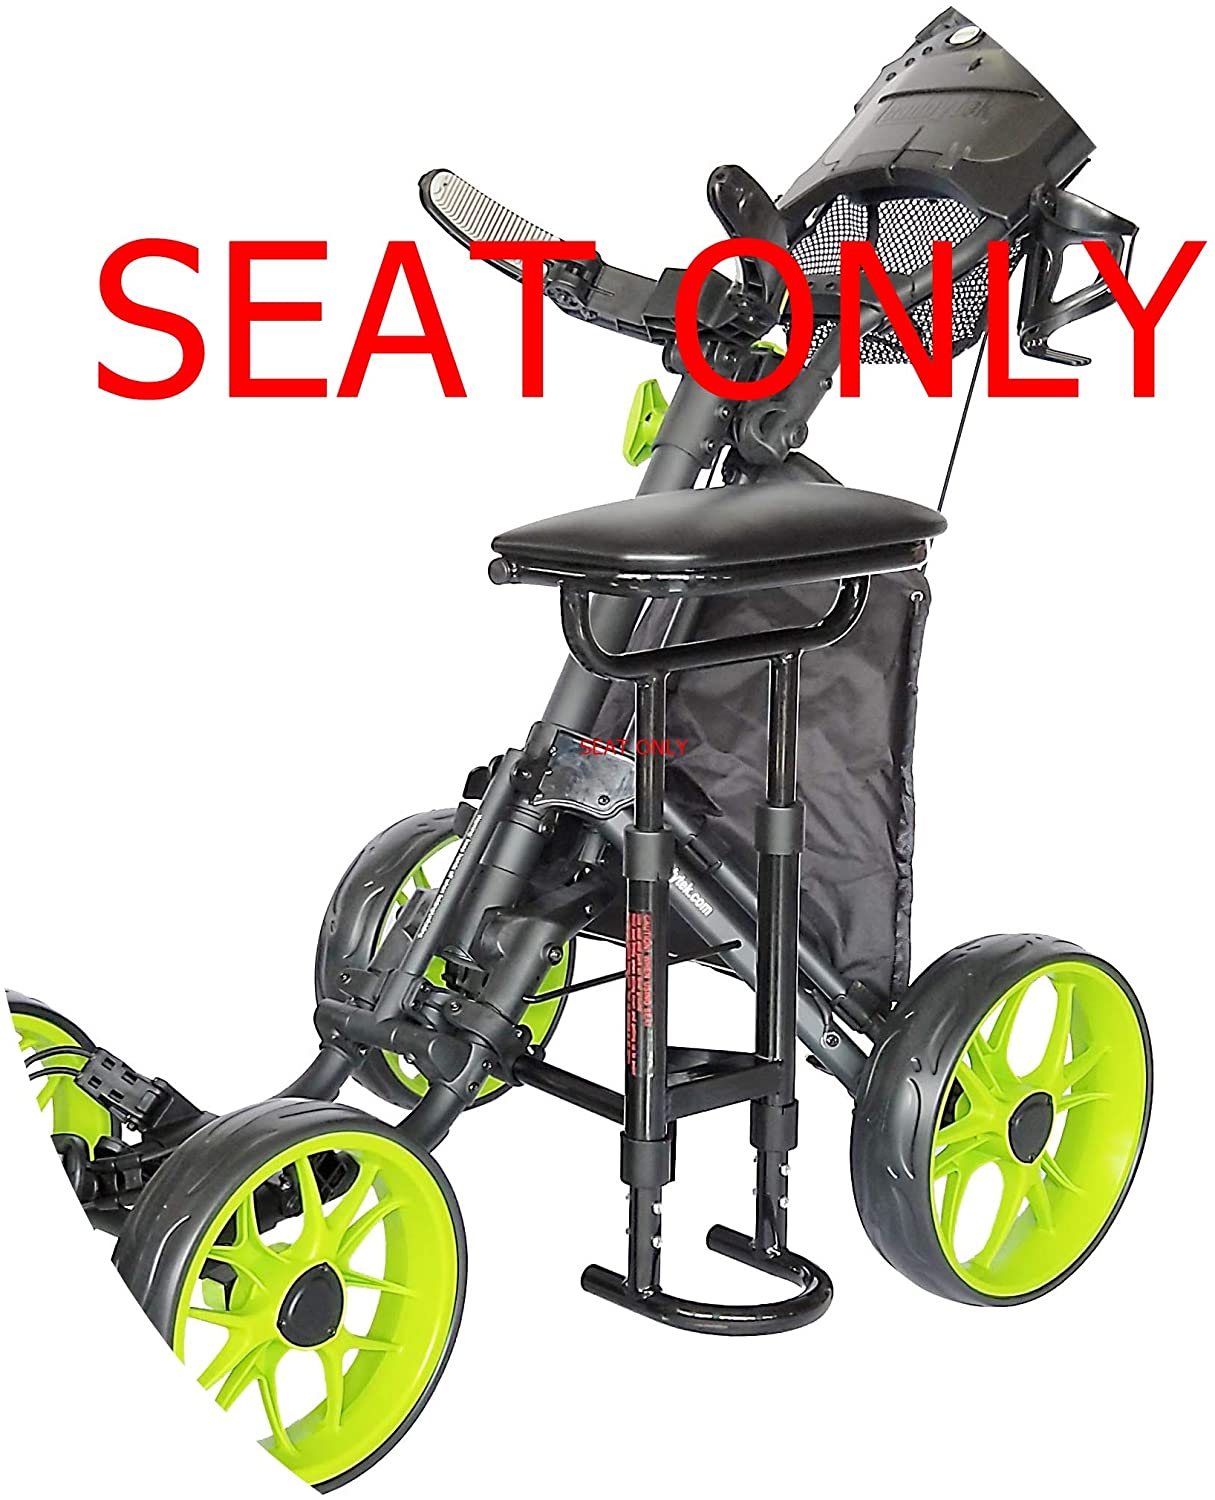 Removable Seat EZ for CaddyLite EZ series of Golf Cart